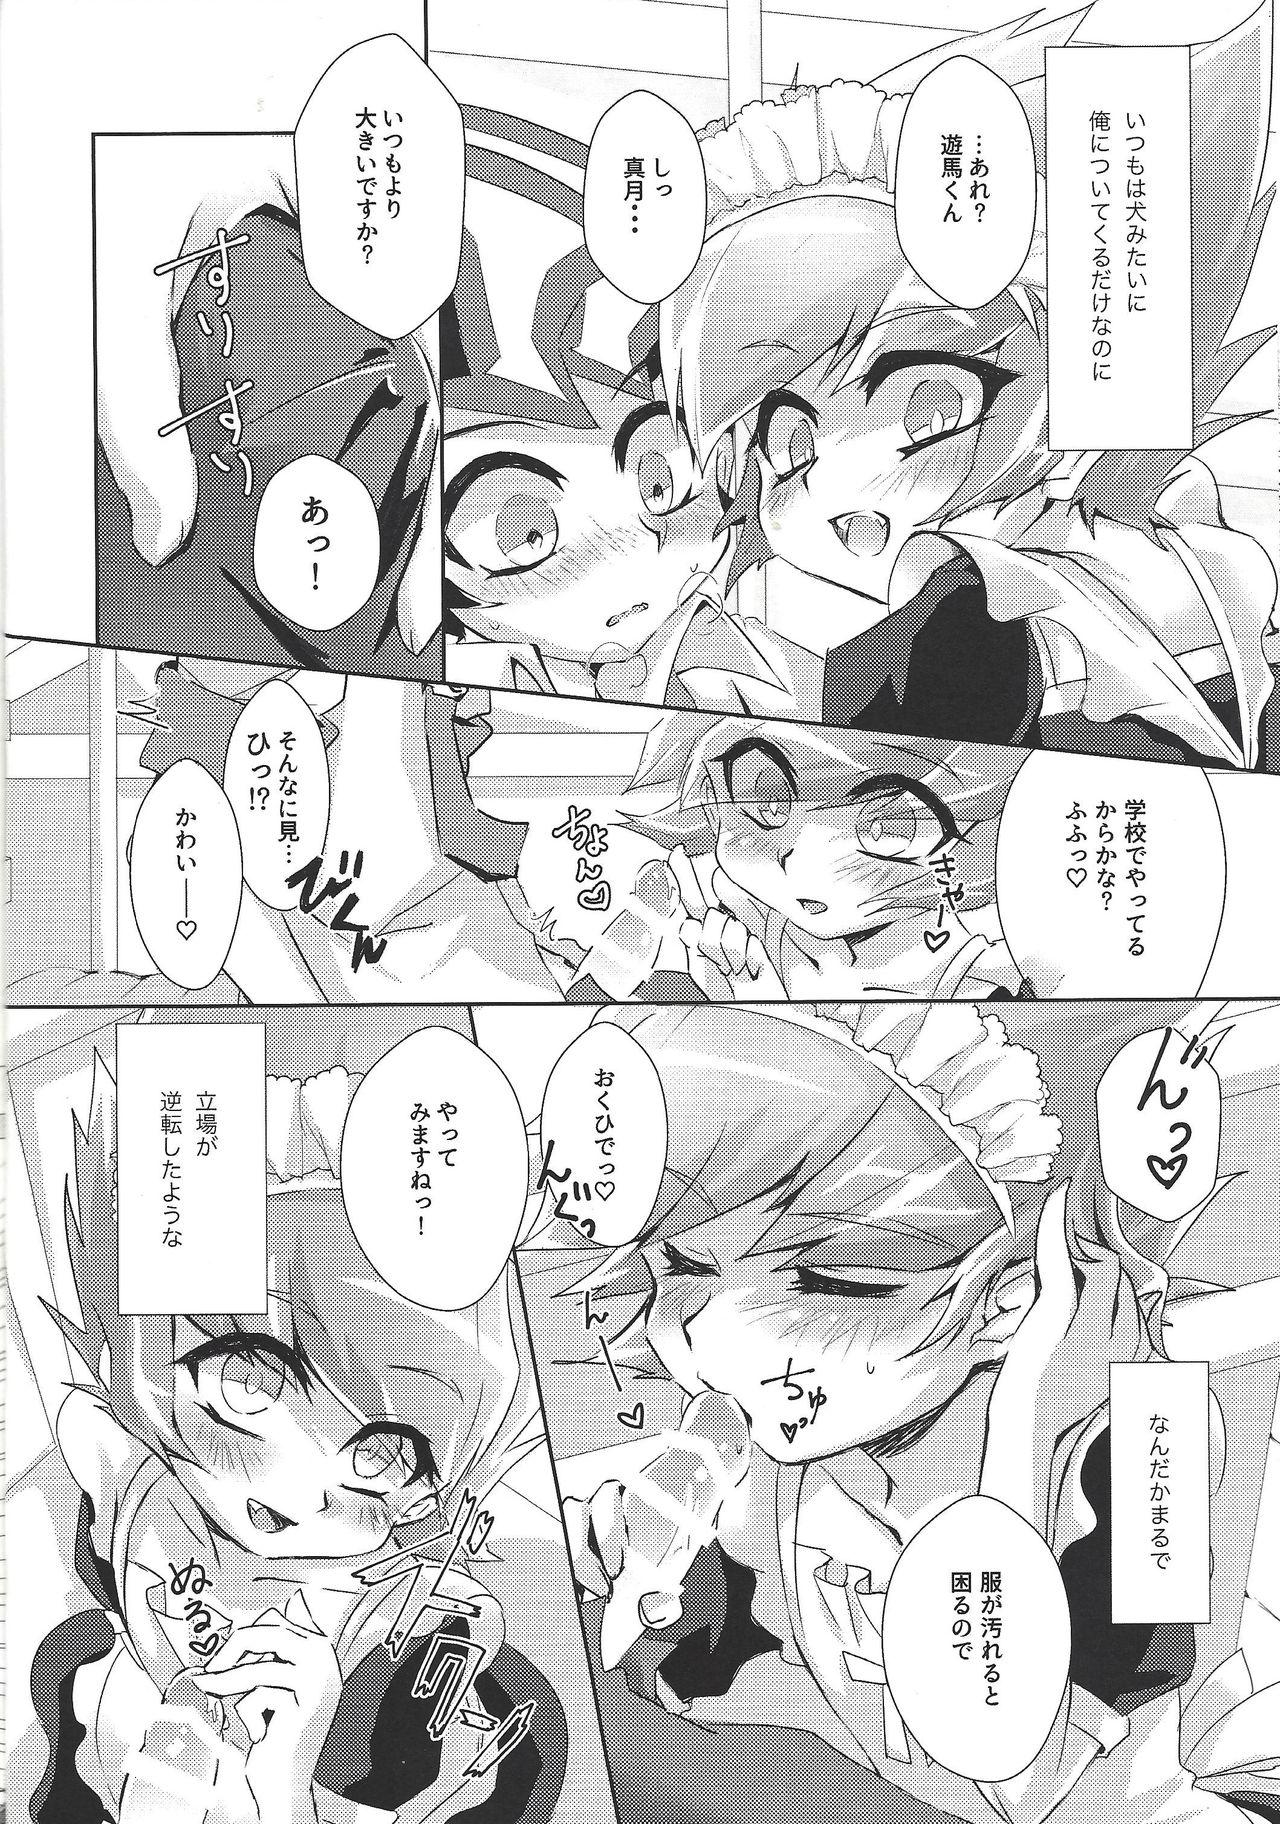 Messy Stand by me - Yu-gi-oh zexal Pattaya - Page 9